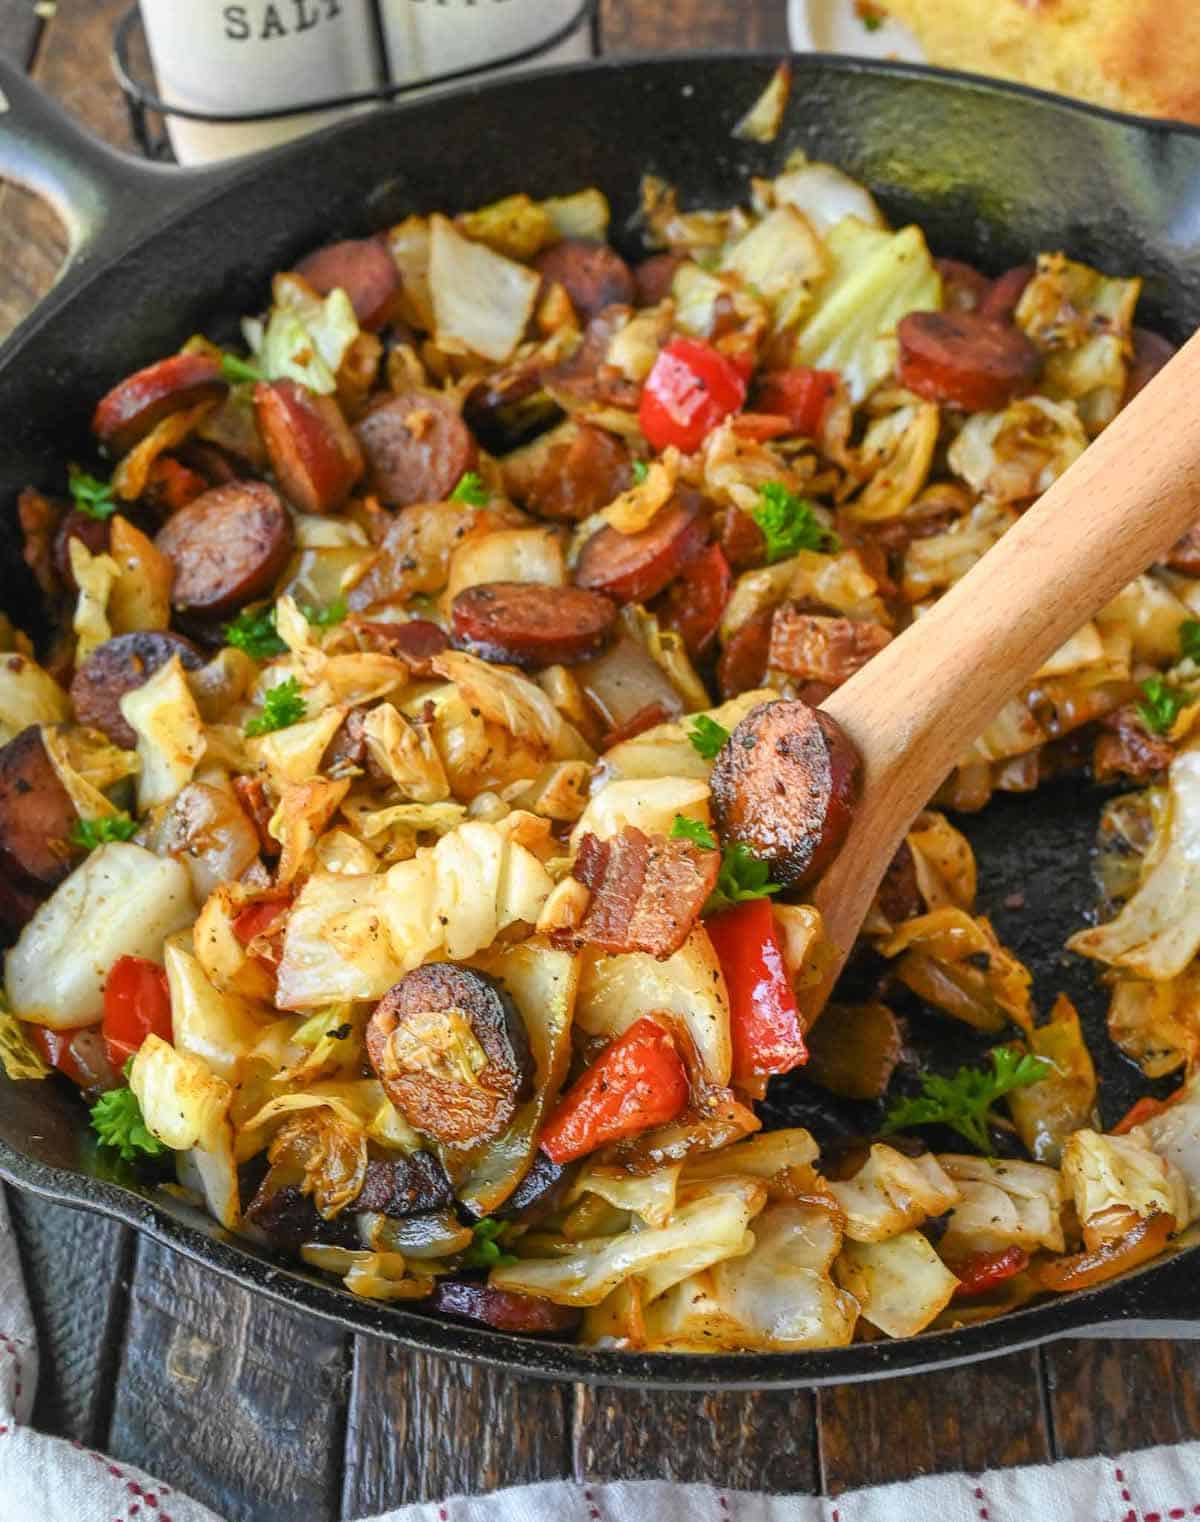 A wooden spoon scooping up a serving of fried cabbage and sausage.